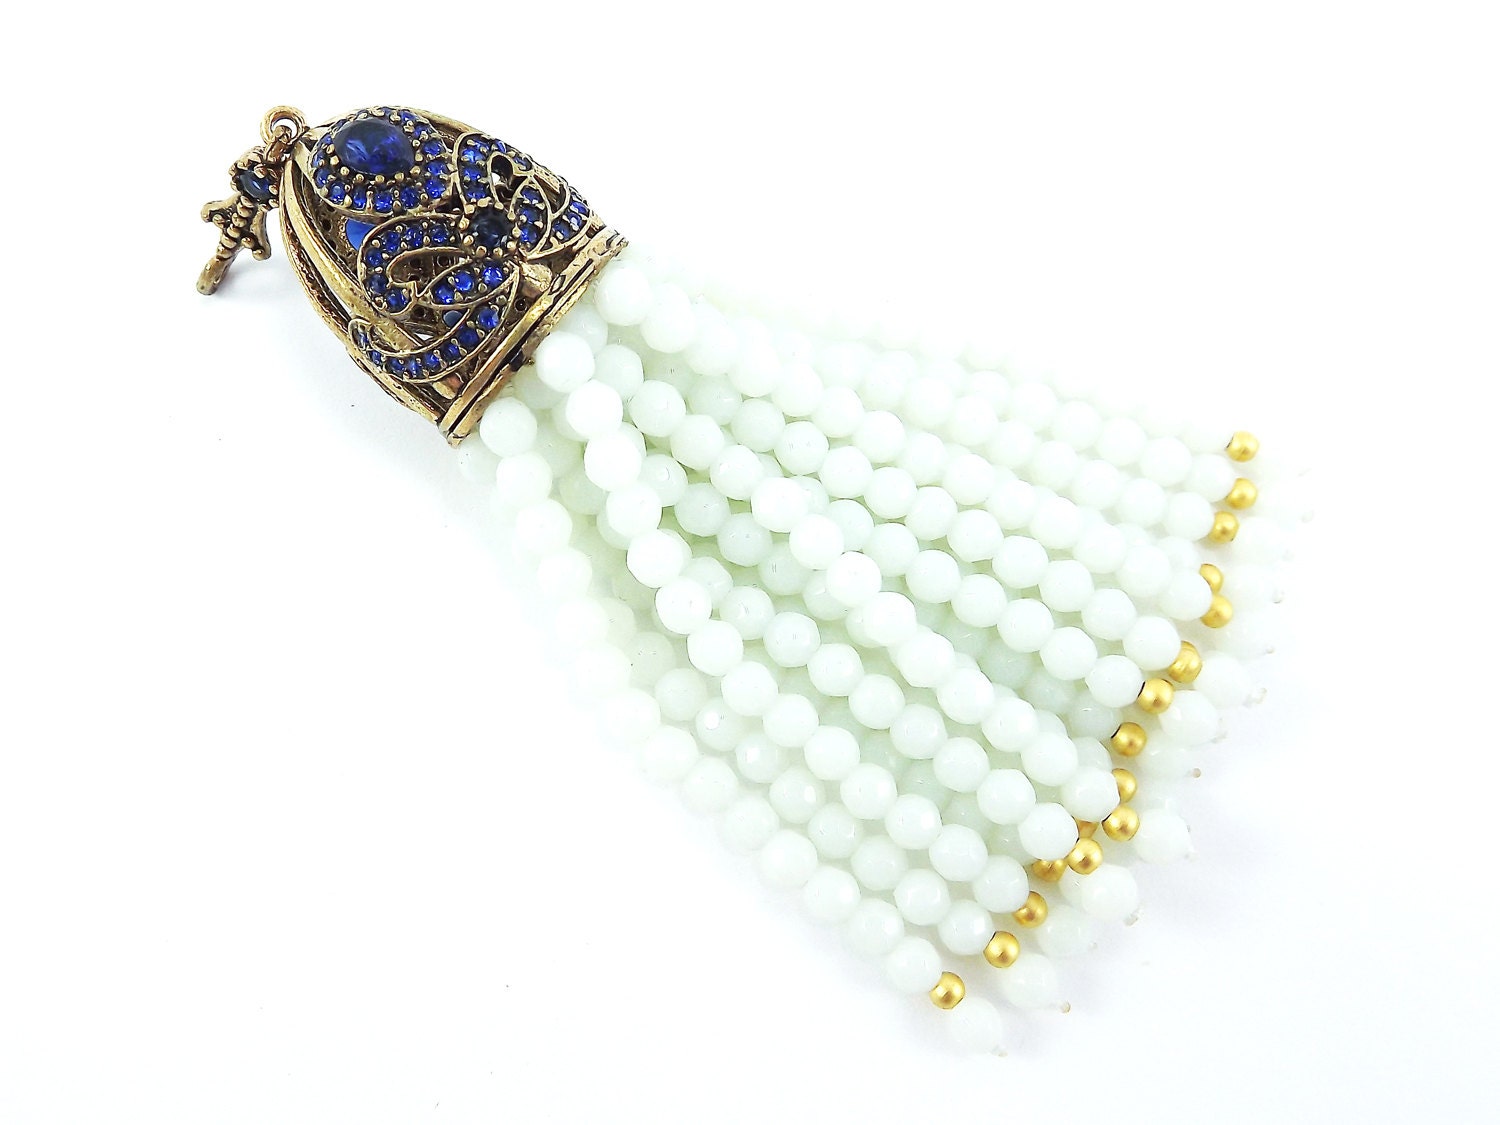 Large Long White Opal Facet Cut Stone Beaded Tassel with Crystal Accents - Antique Bronze - 1PC